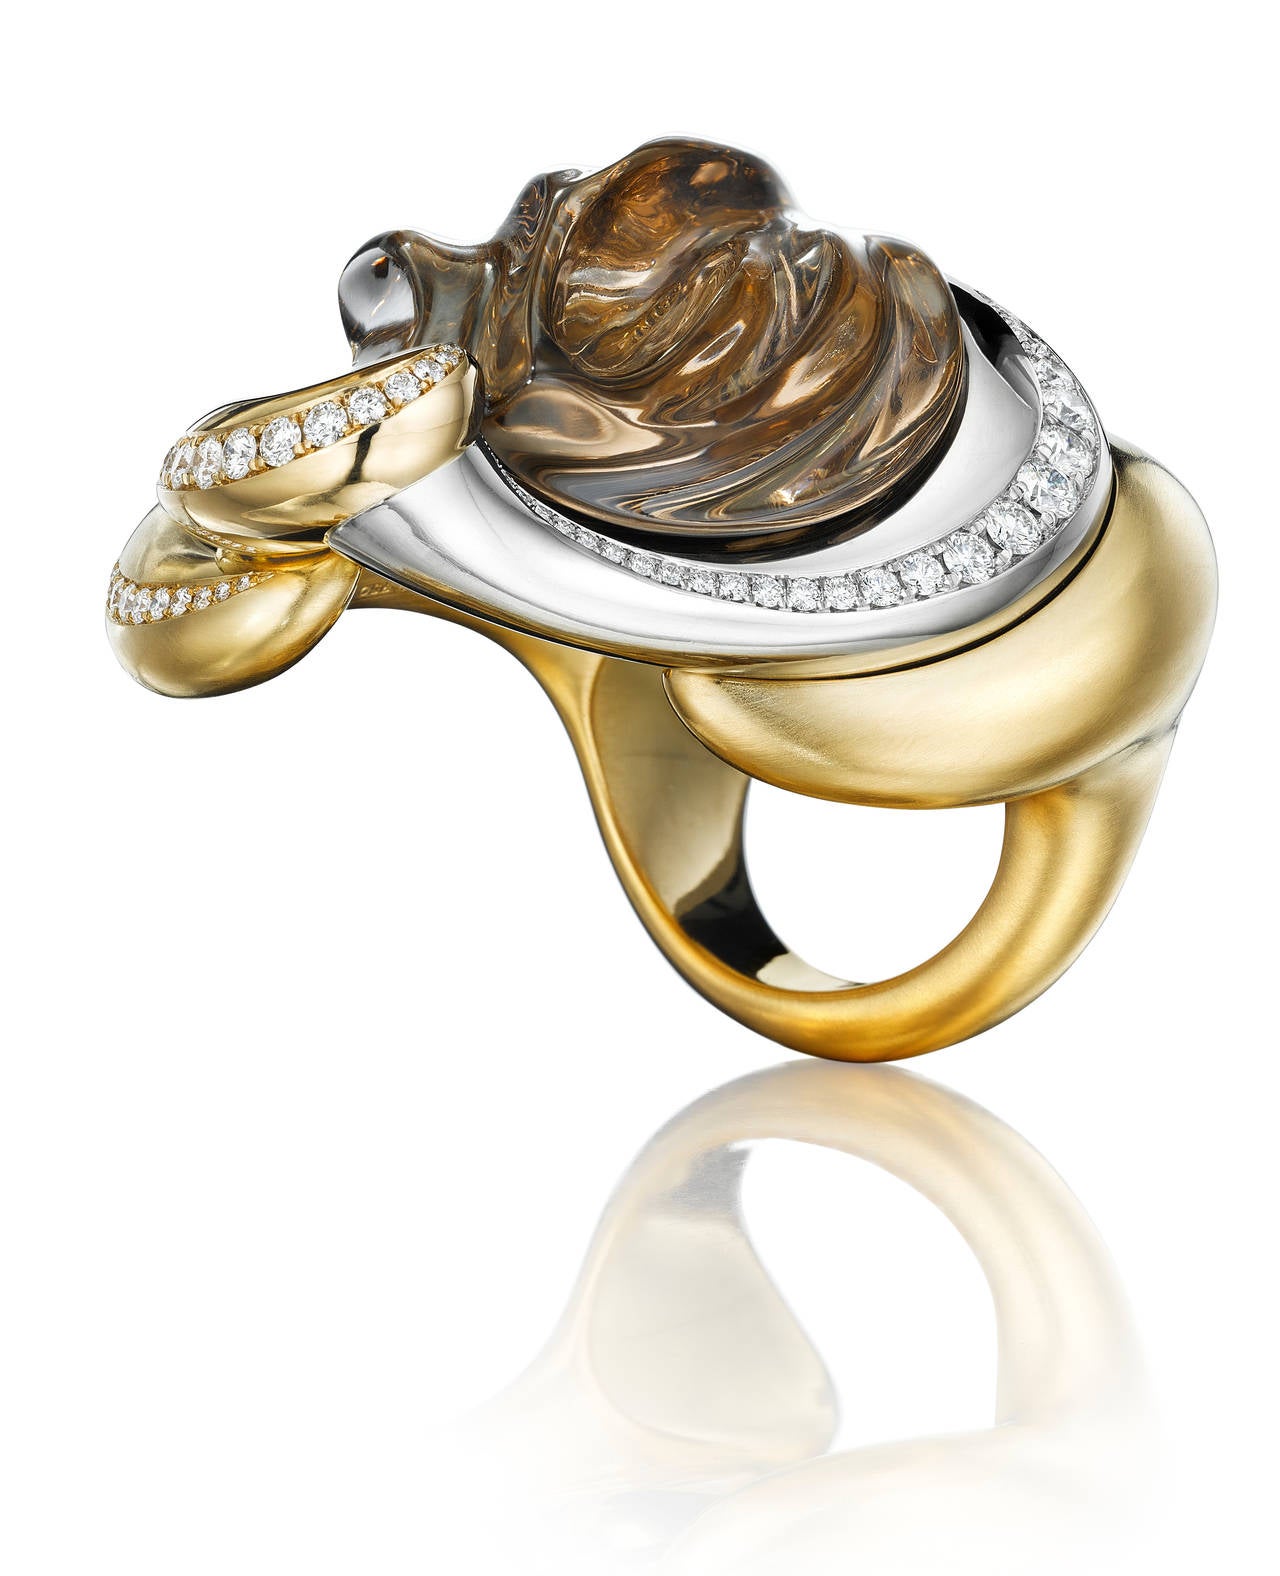 A genie, a sultan or an empress would wear this spectacular over-sized, seriously sensuous art ring. A truly magnificent piece of sculpture you can wear. This one-of-a-kind ring features a hand-carved 63.5 ct smoky quartz set in platinum, 18K yellow